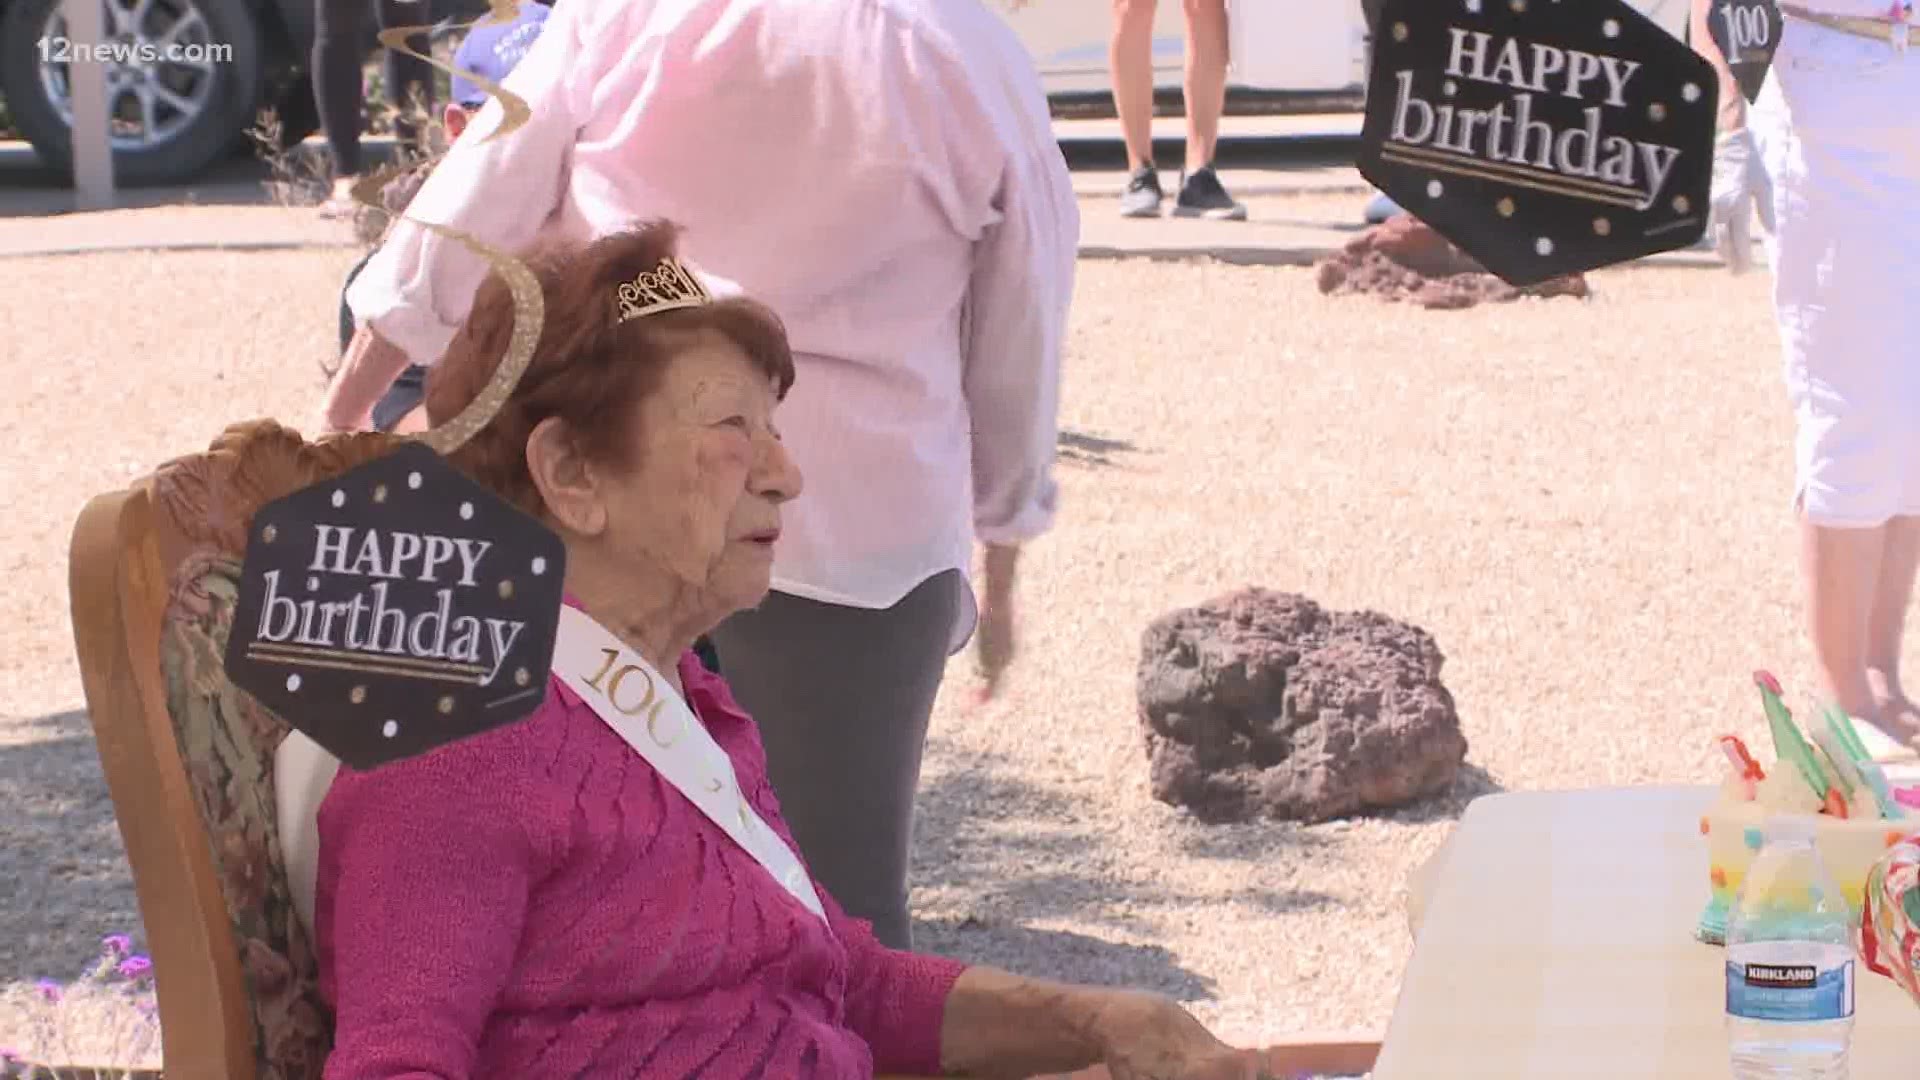 The Scottsdale Fire Department made a special birthday stop for 100-year-old Grandma Mary. Her family says it's important to continue celebrating big milestones.